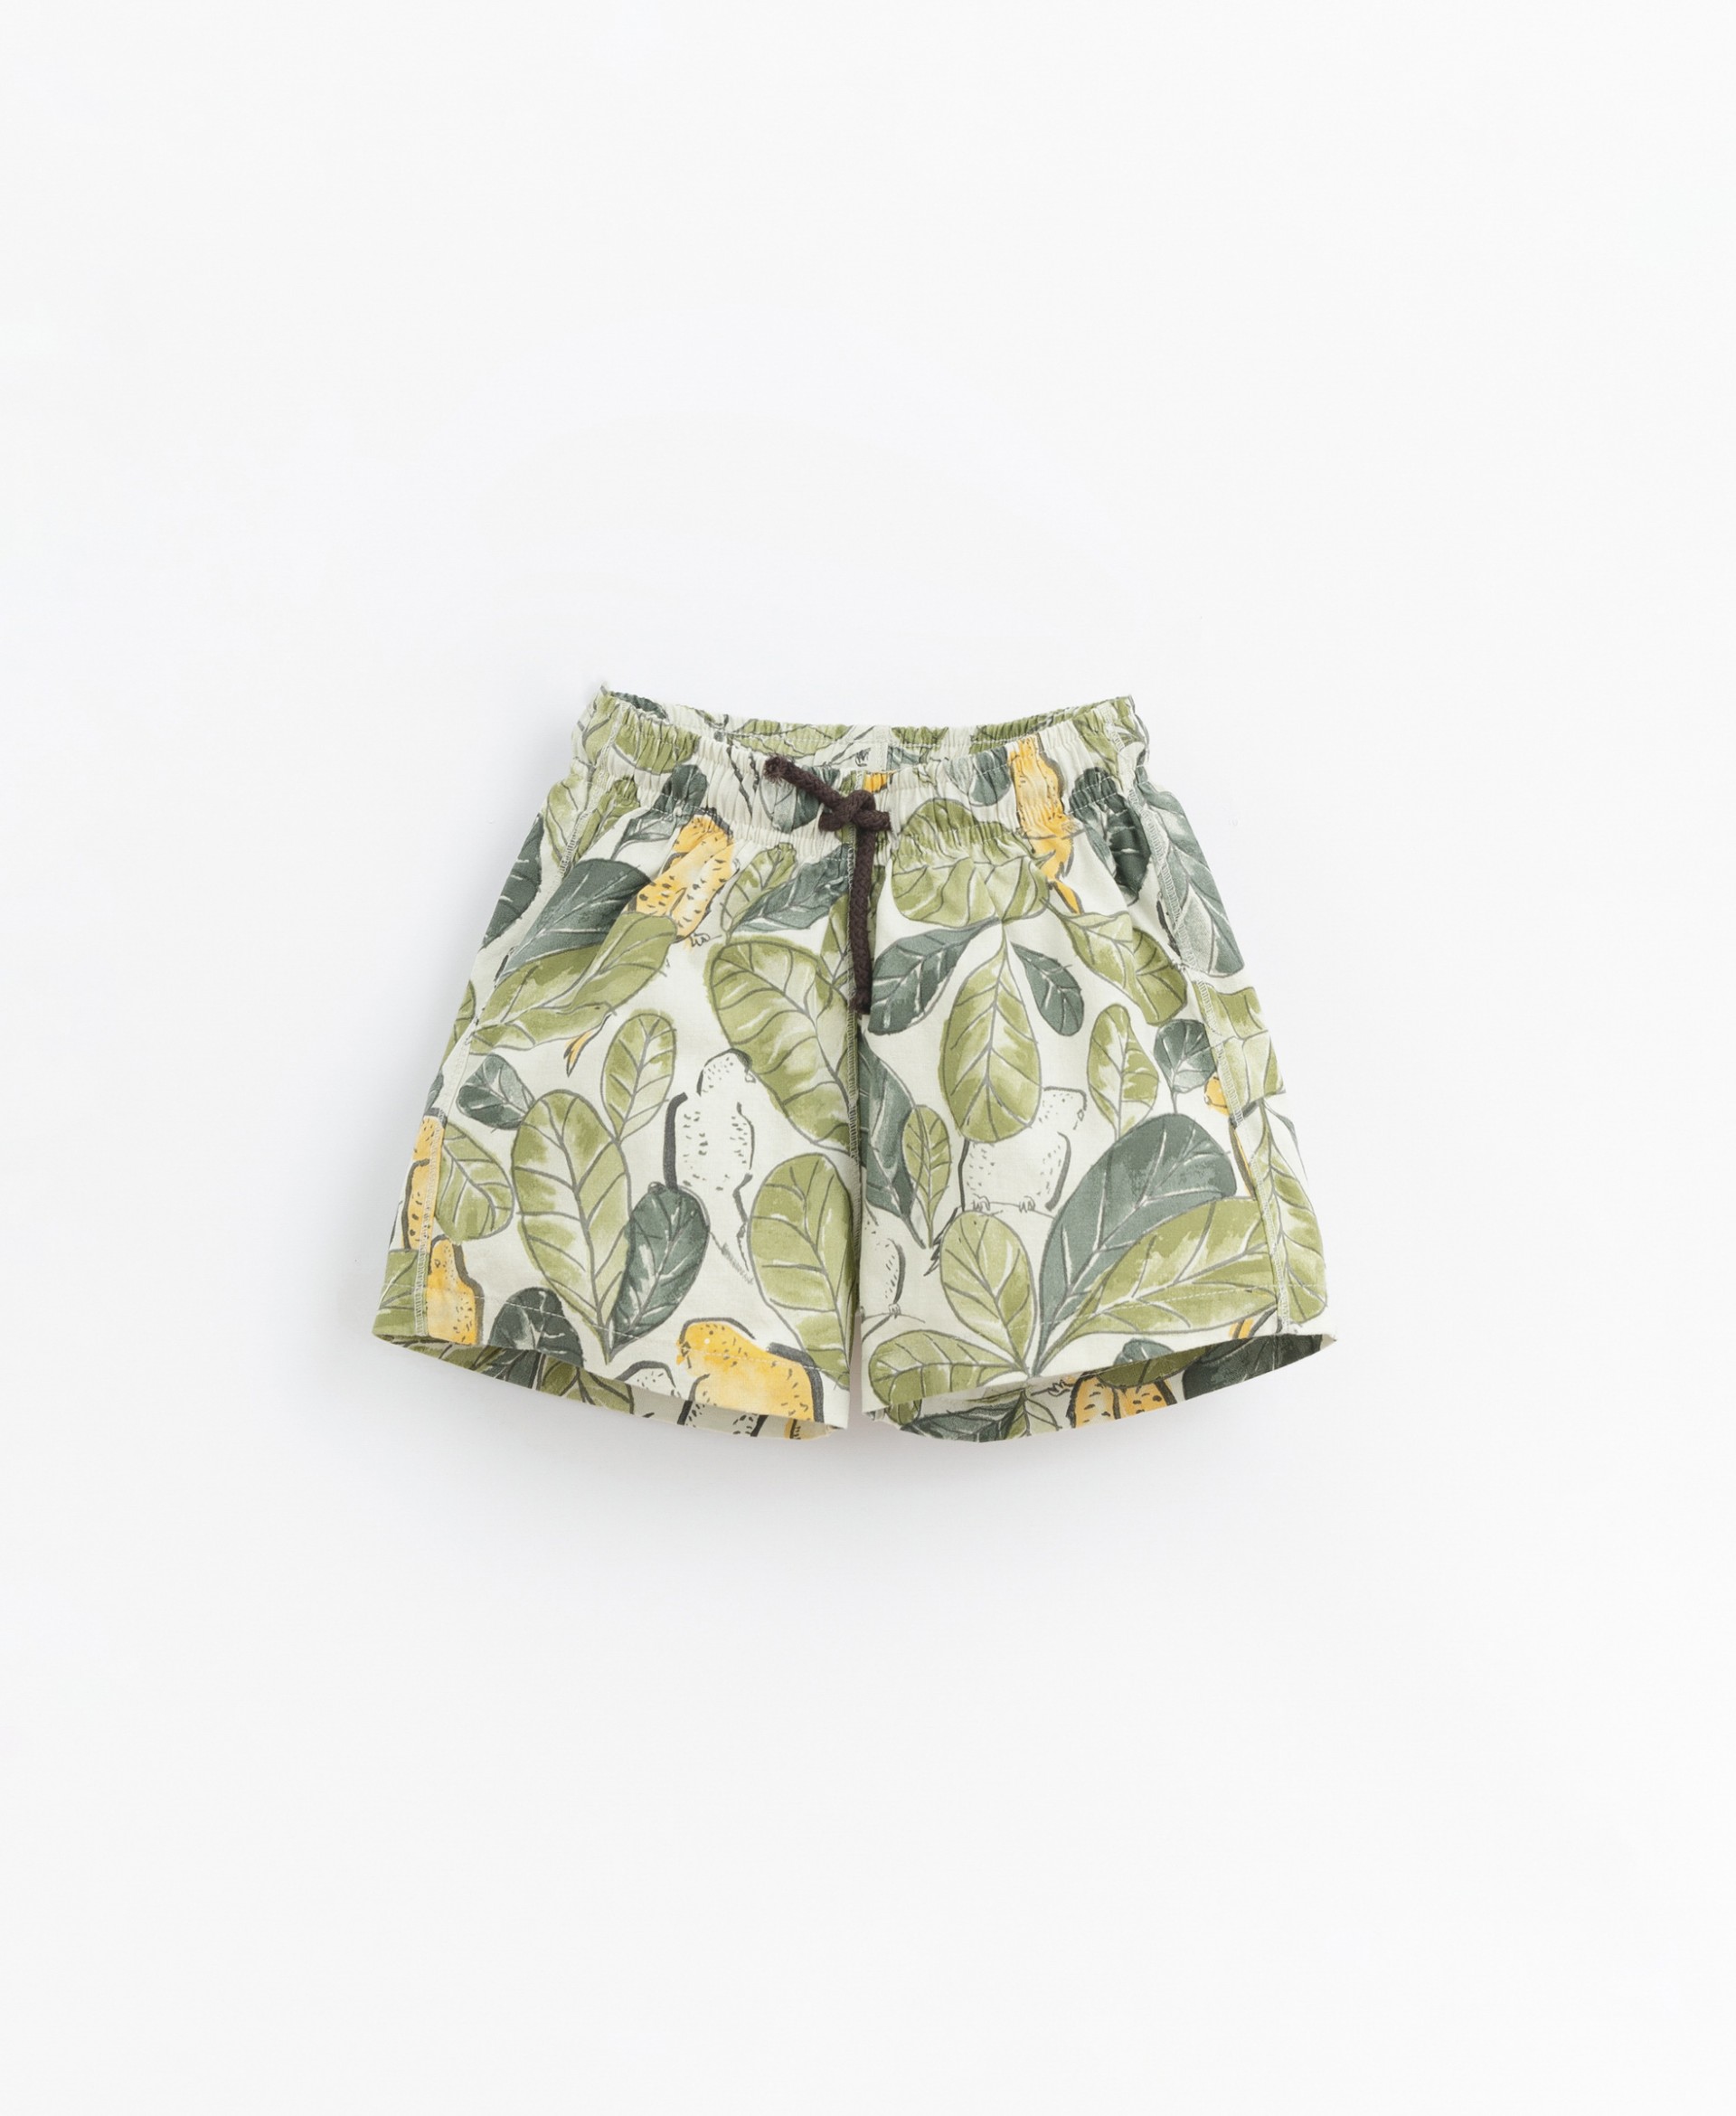 Swimming trunks with pocket | Basketry